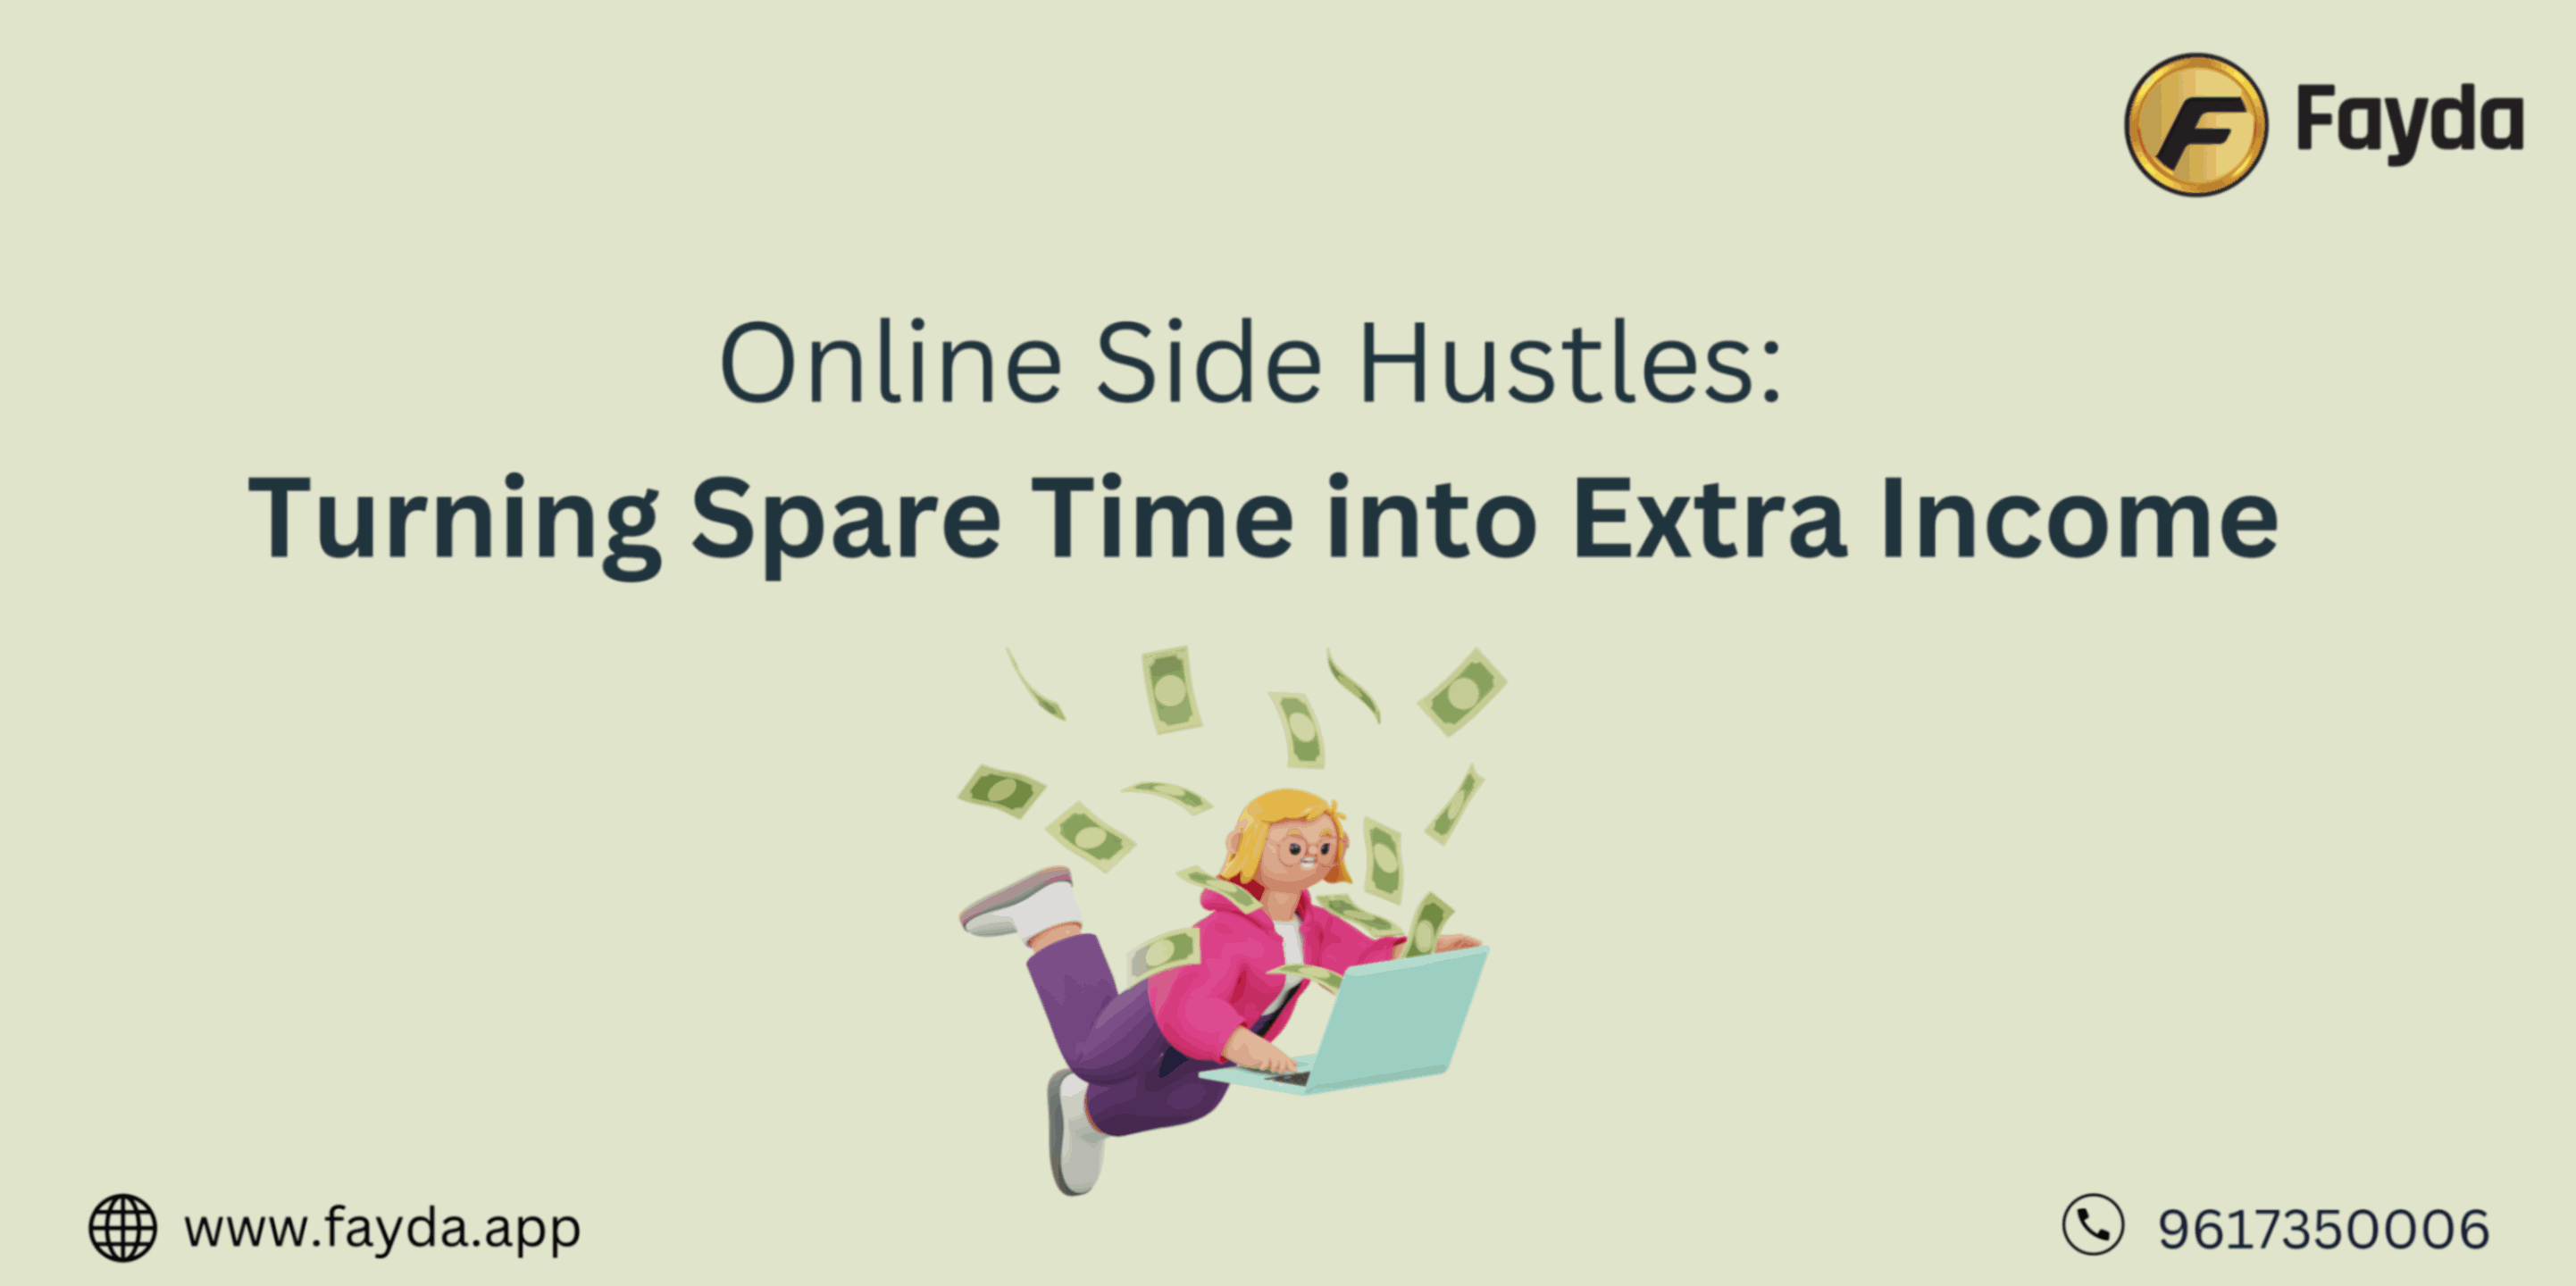 Online Side Hustles: Turning Spare Time into Extra Income